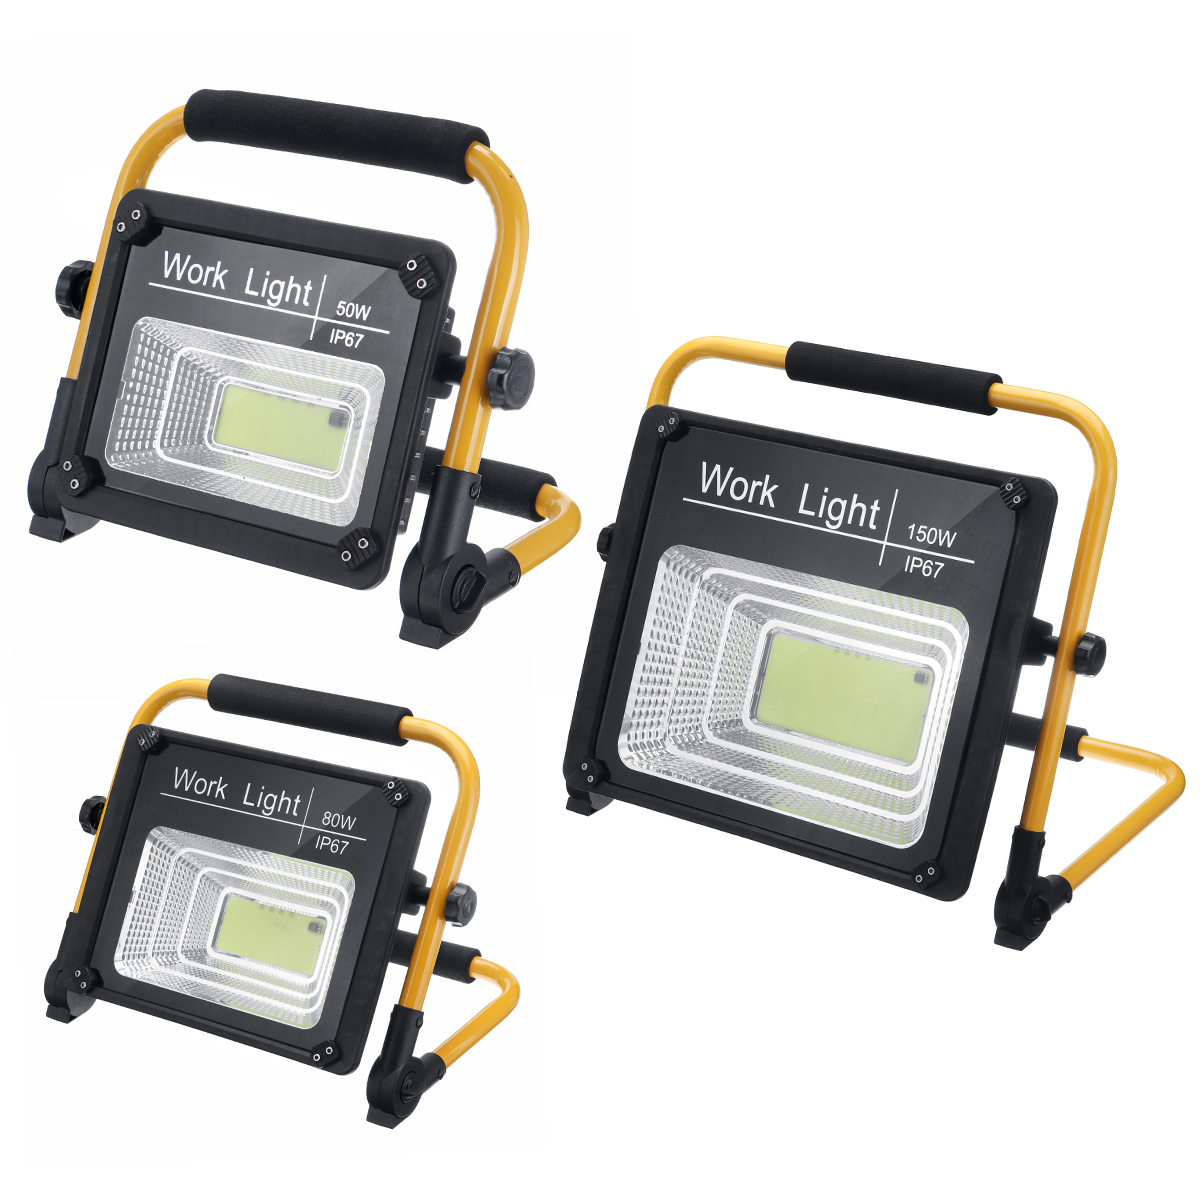 Find 50/80/150W LED Outside Wall Light Garden Security Flood Light IP67 Remote Control for Sale on Gipsybee.com with cryptocurrencies